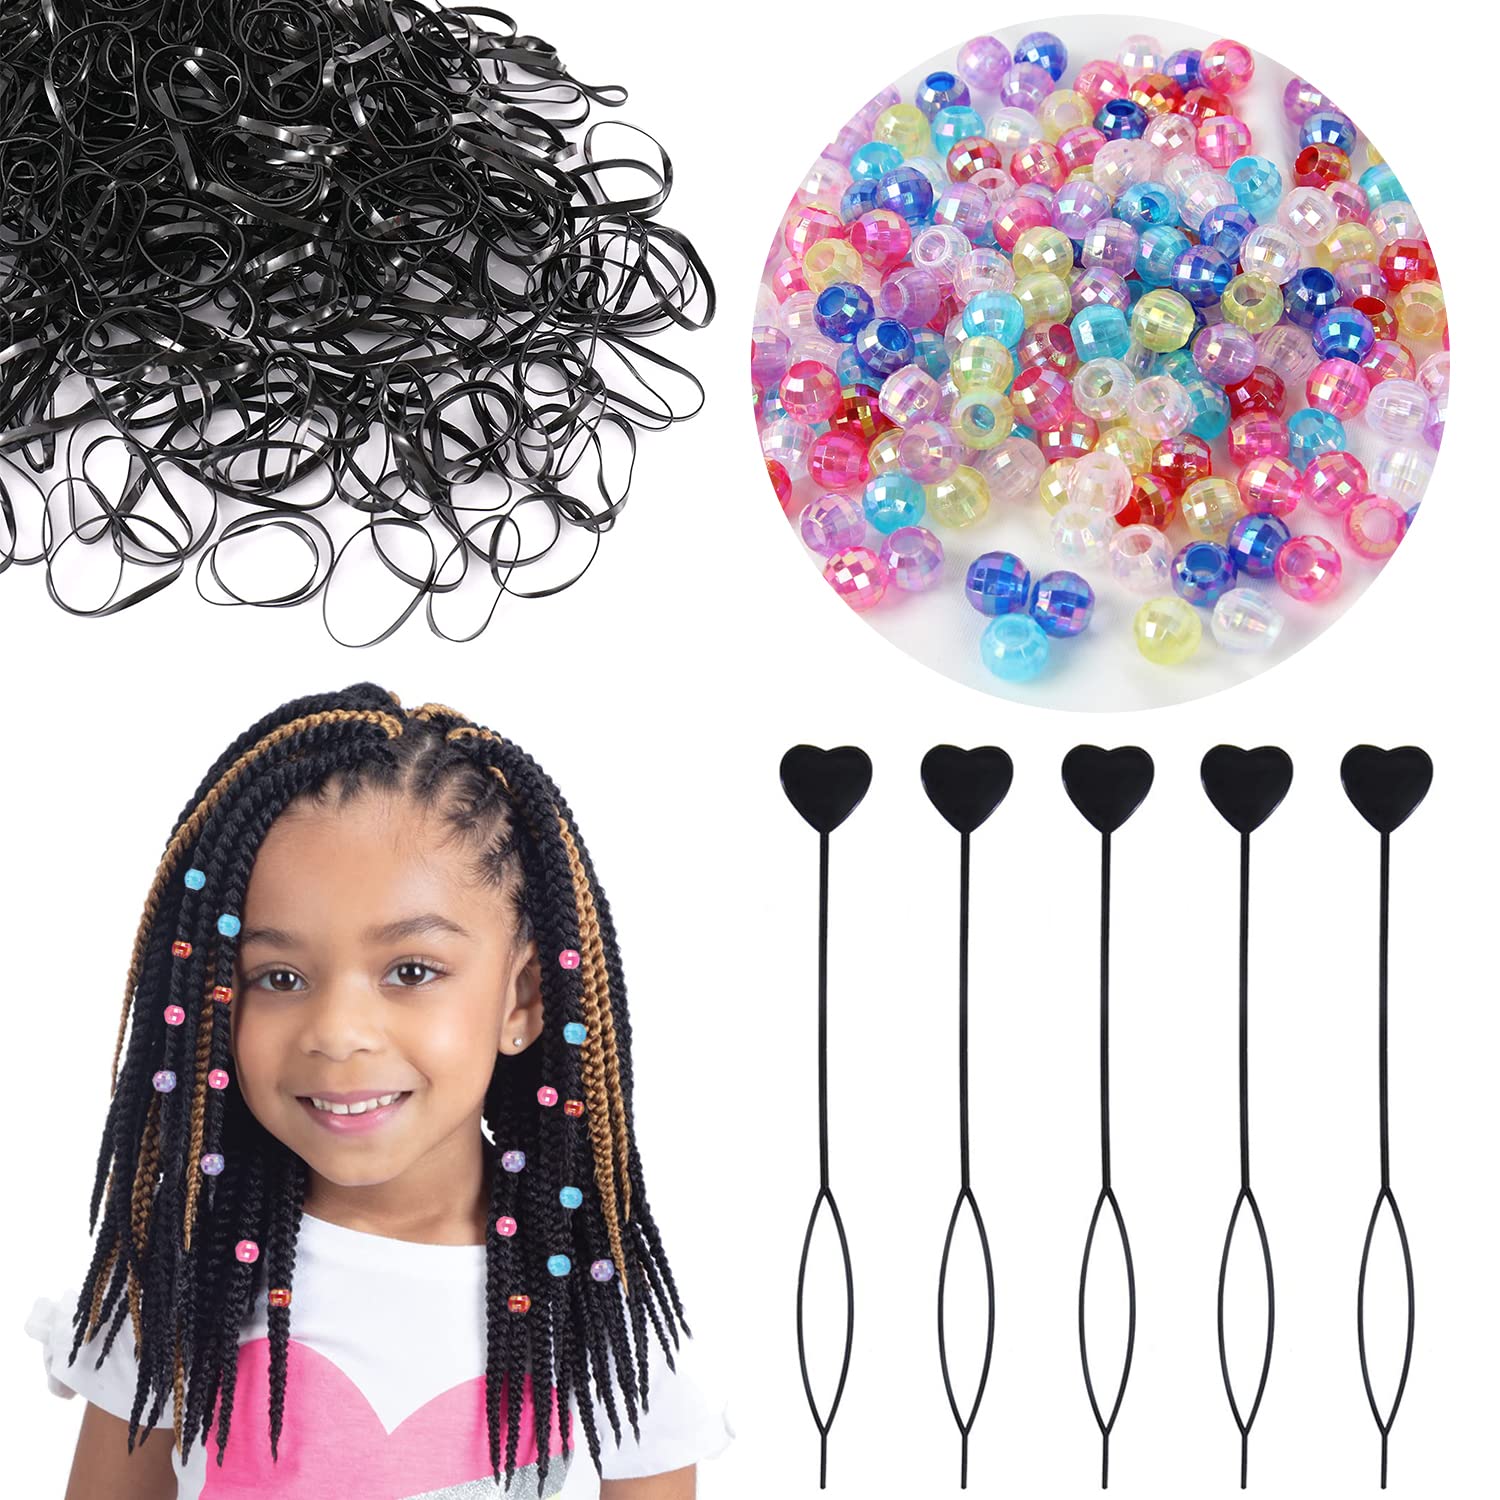 How to put on hair beads with a DIY Hair Beader 